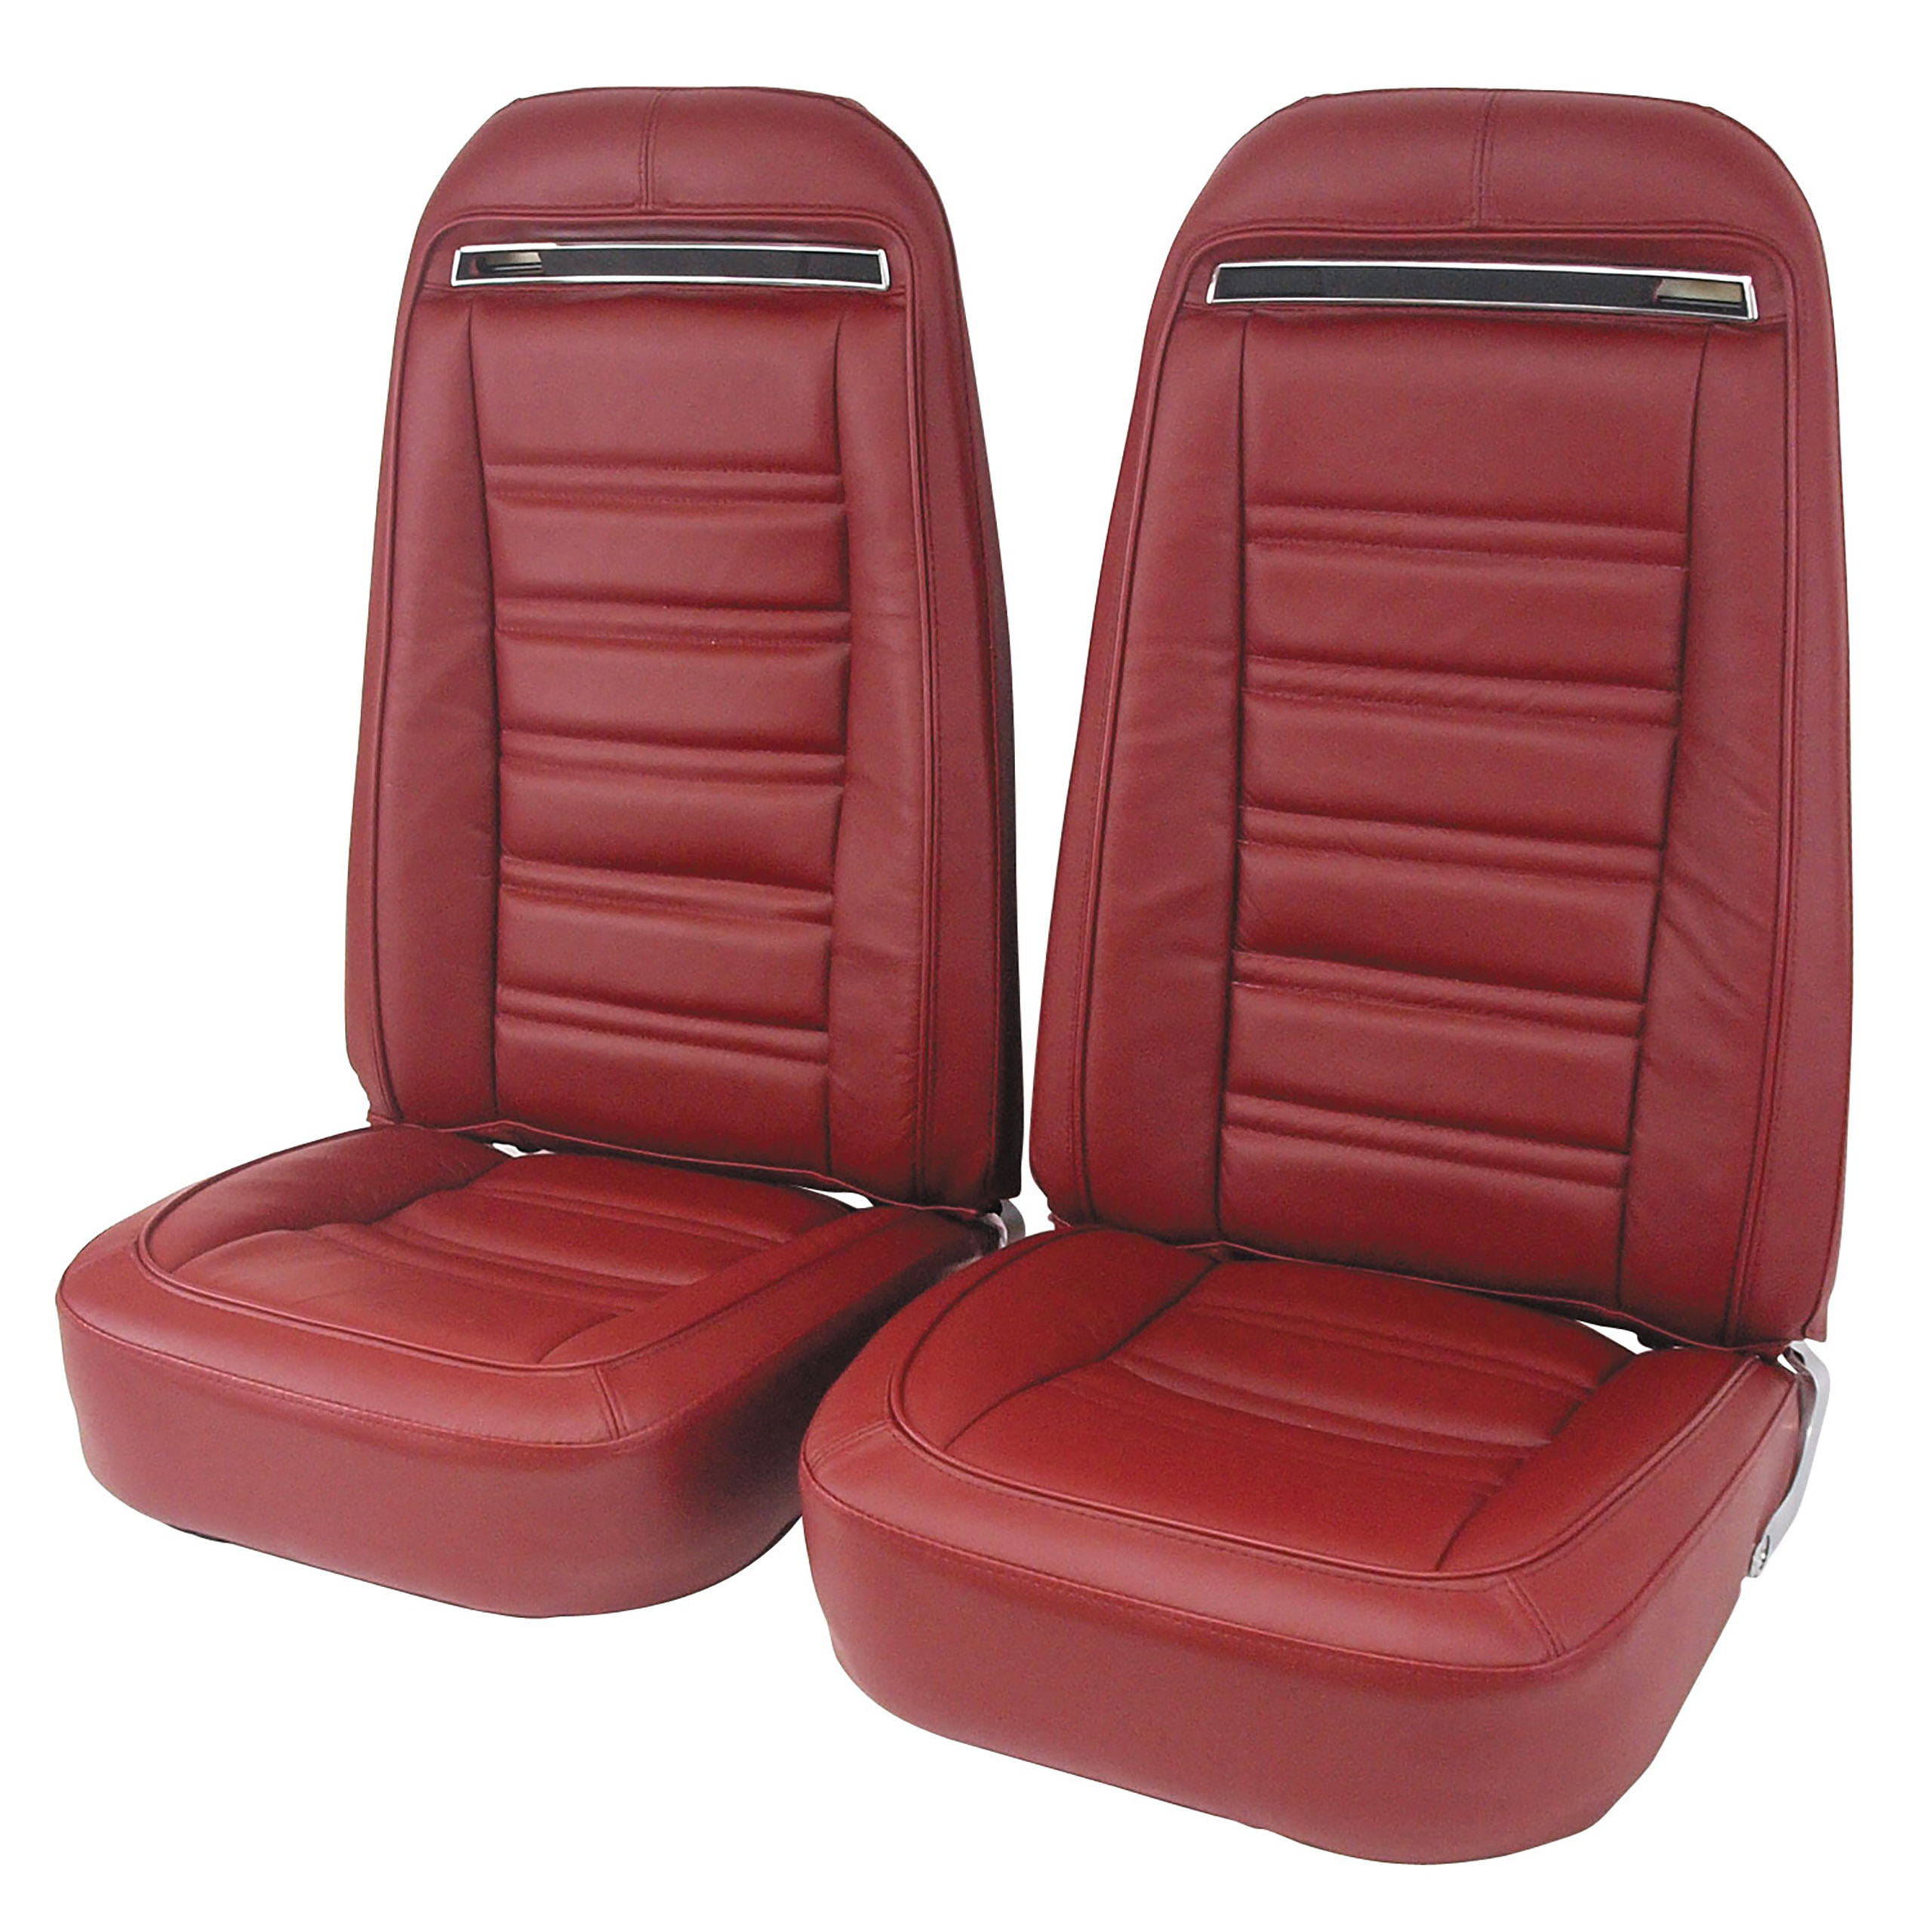 1975 C3 Corvette Mounted Seats Oxblood Leather Vinyl Without Shoulder Harness